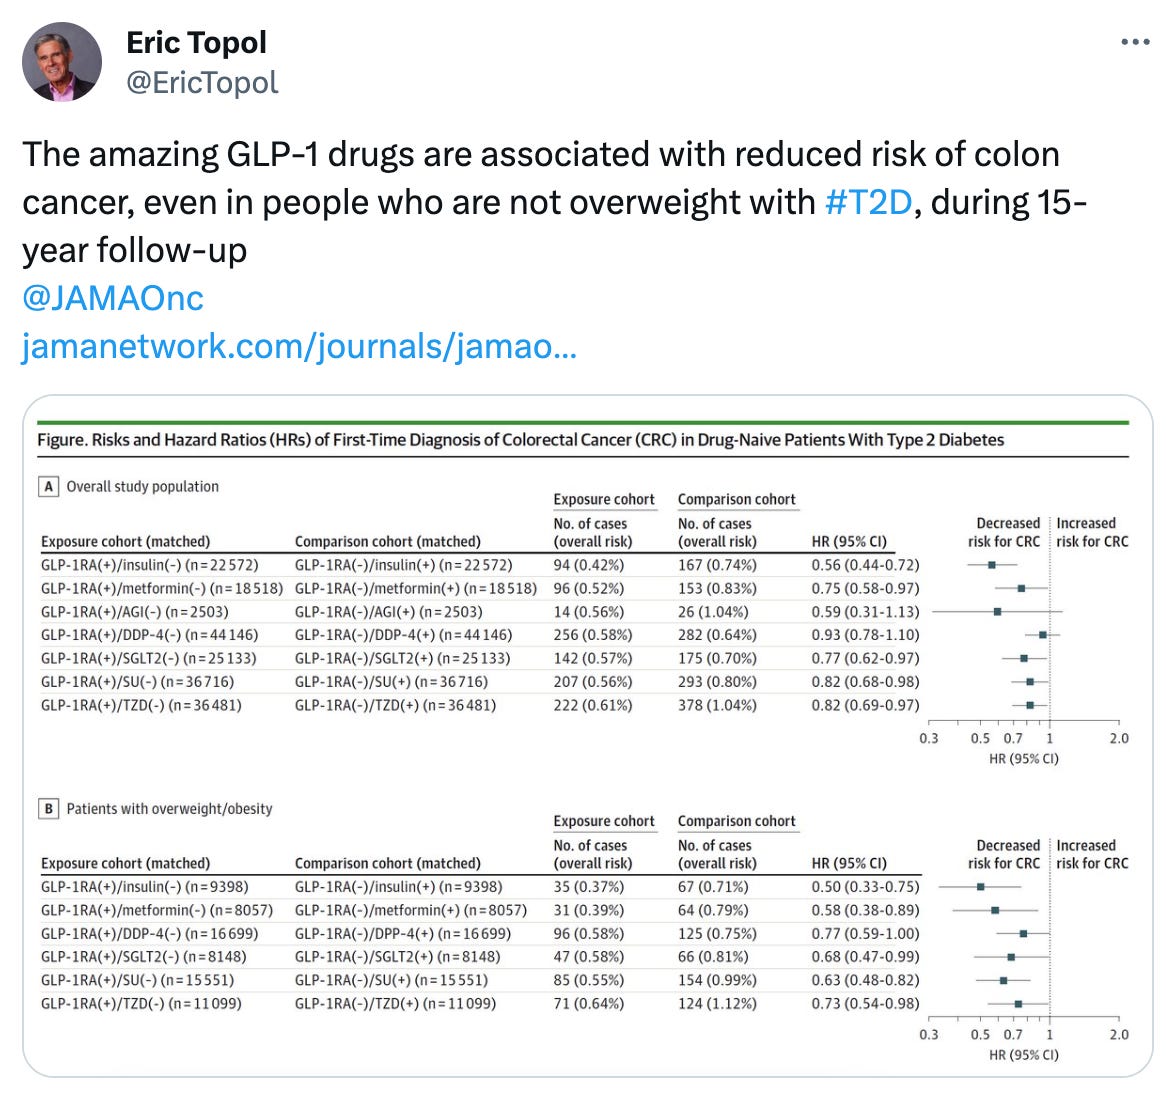  Eric Topol @EricTopol The amazing GLP-1 drugs are associated with reduced risk of colon cancer, even in people who are not overweight with #T2D, during 15-year follow-up @JAMAOnc   https://jamanetwork.com/journals/jamaoncology/fullarticle/2812769